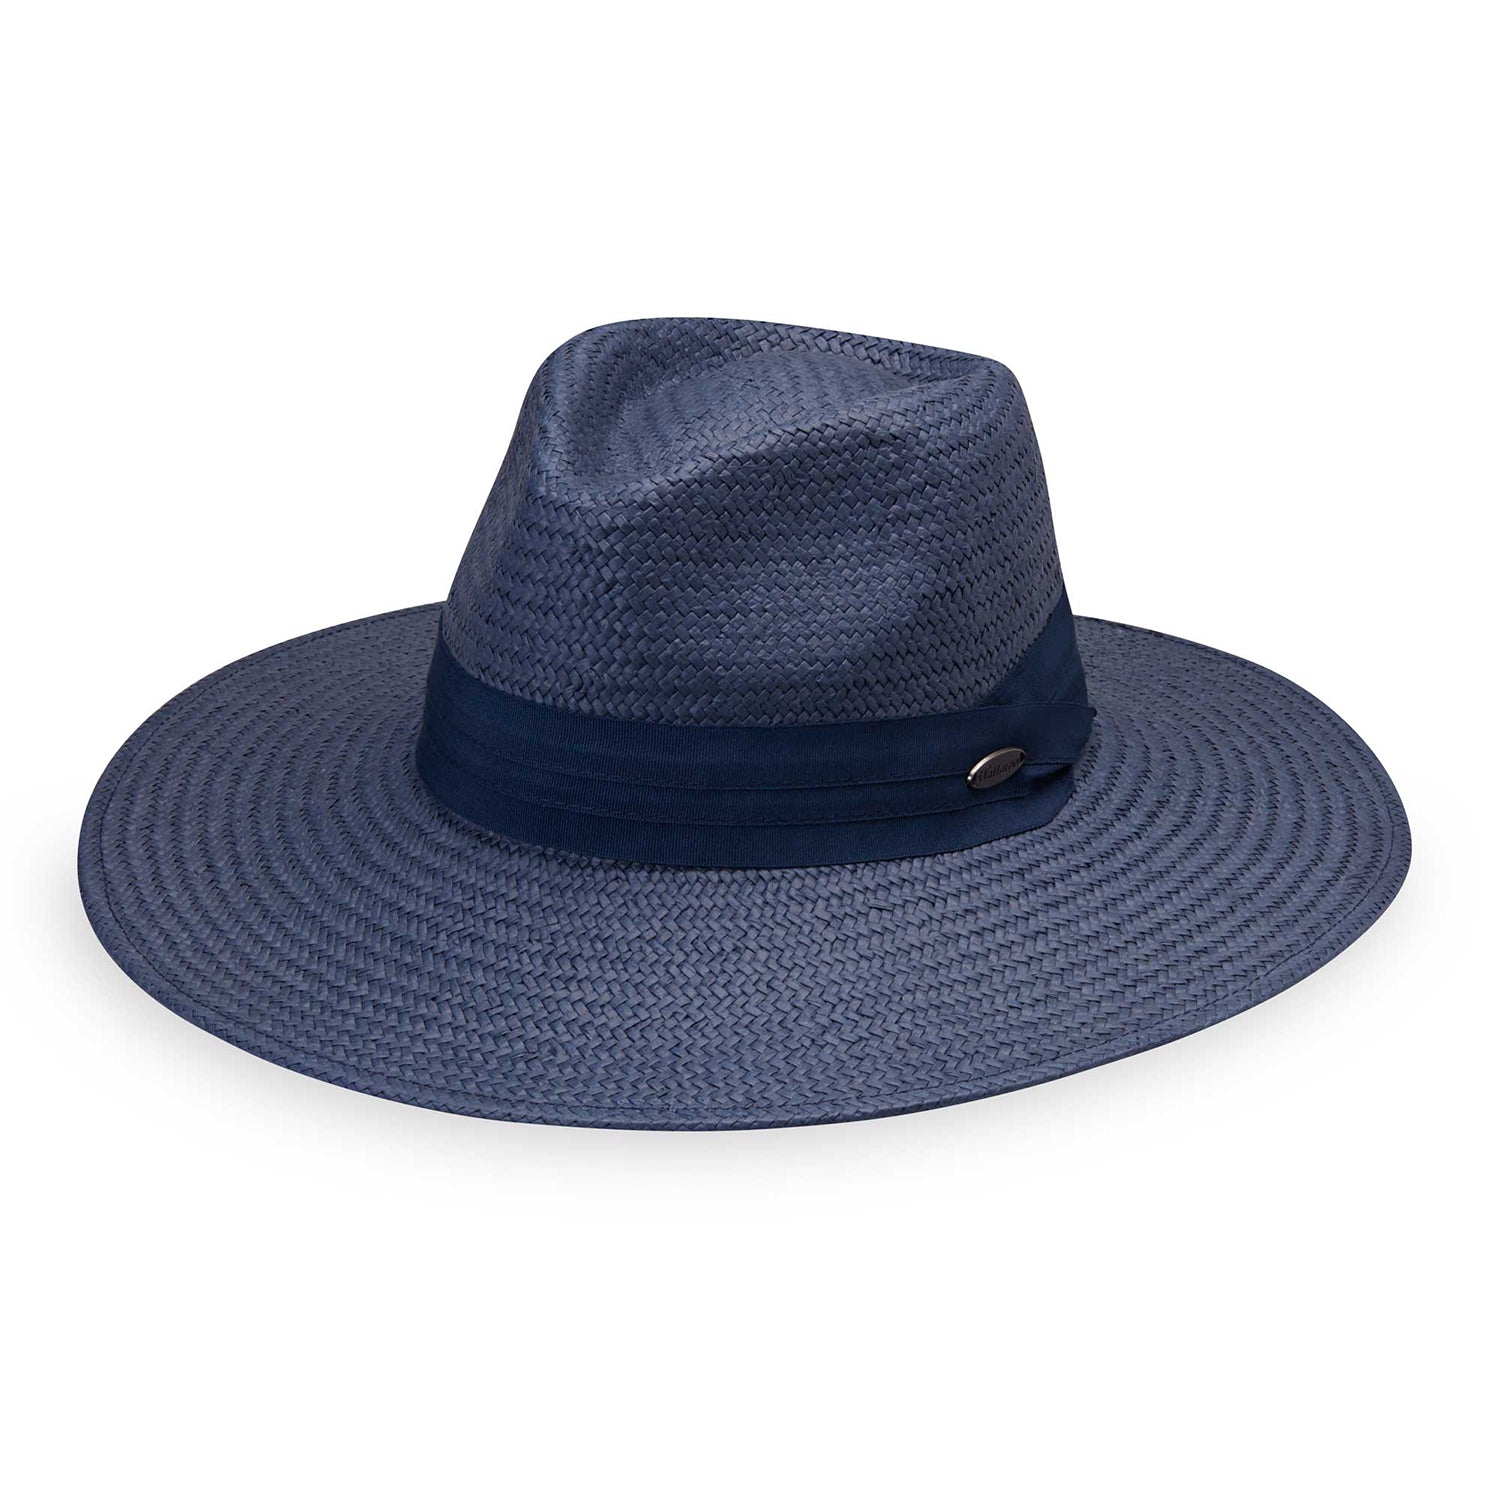 Featuring Fedora style Klara sun hat by Wallaroo featuring a wide brim and UPF 50+ rating